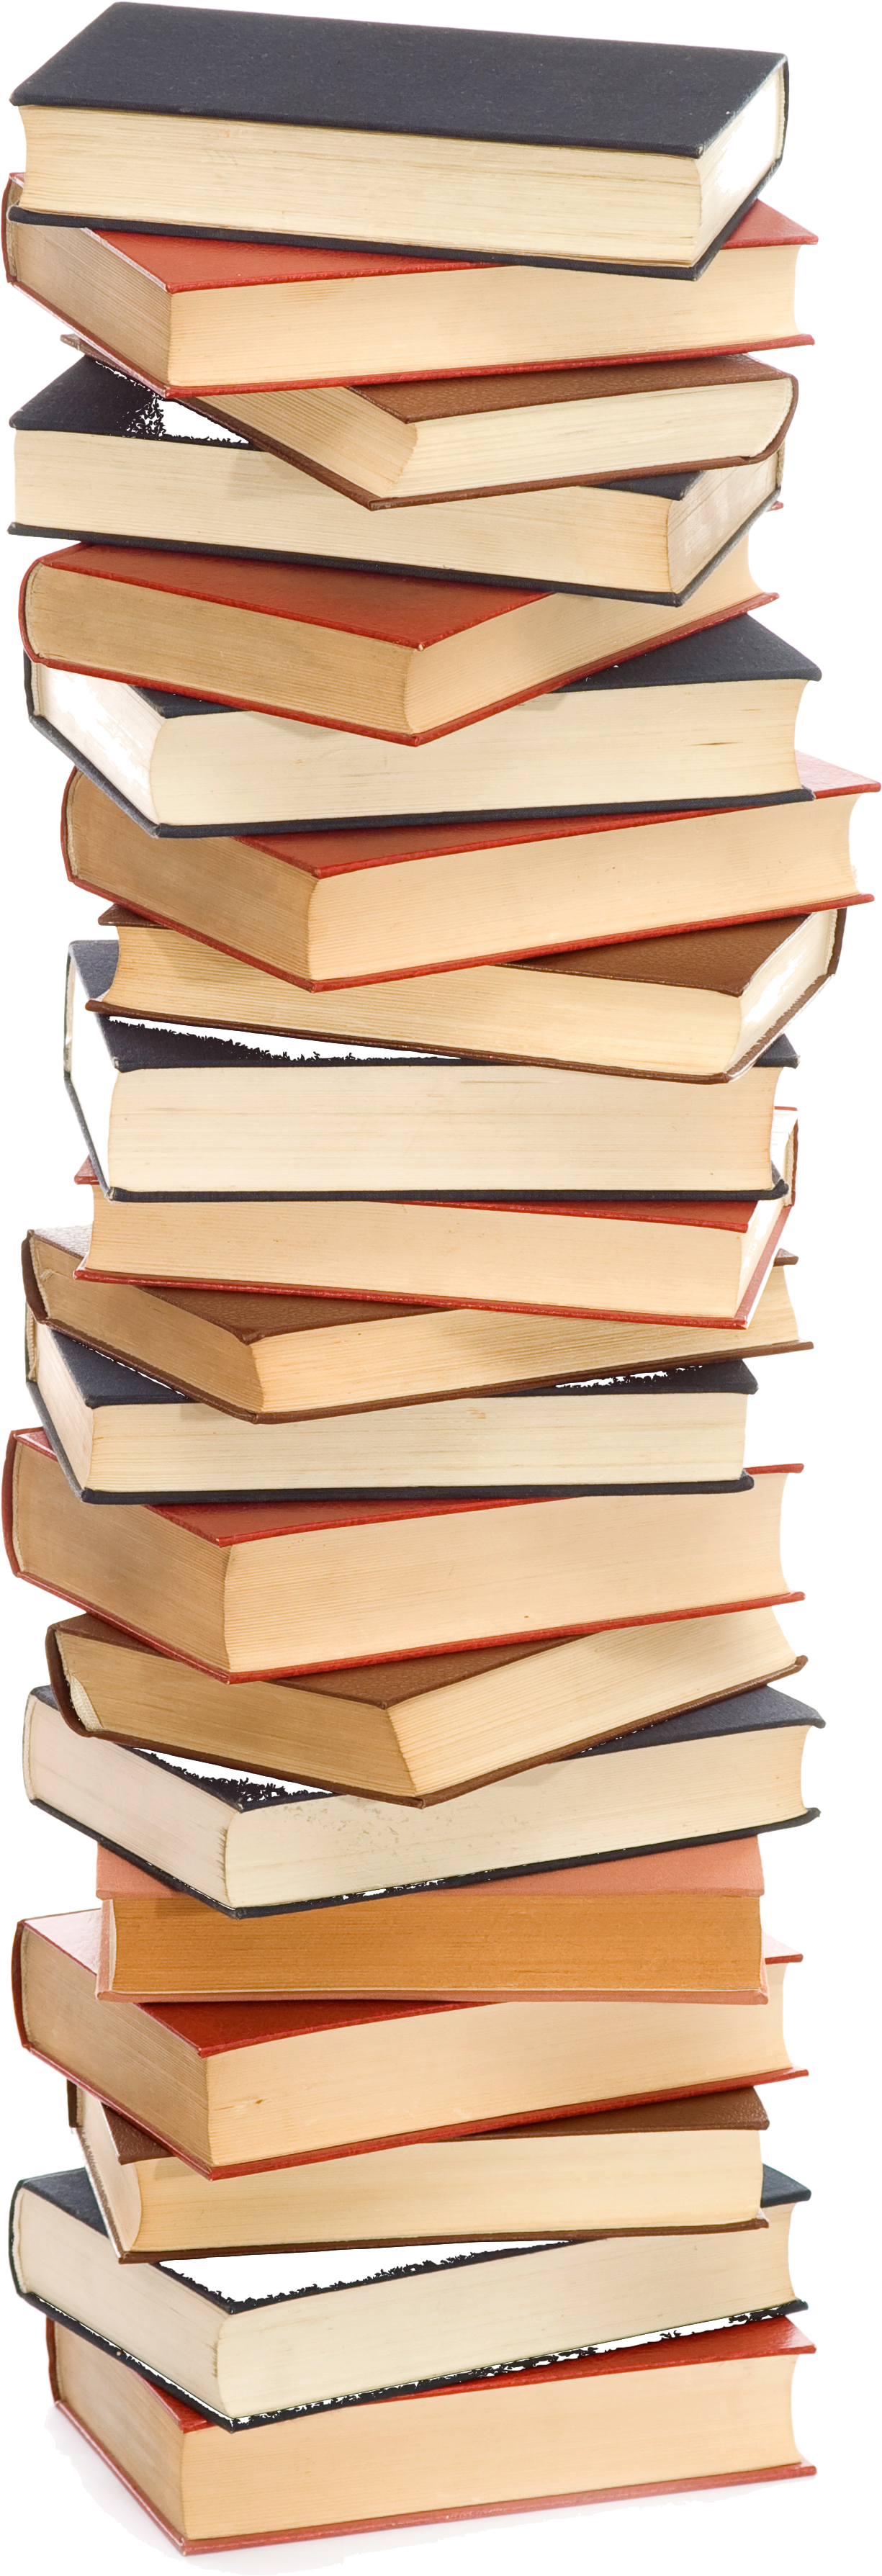 free clipart stack of books - photo #39